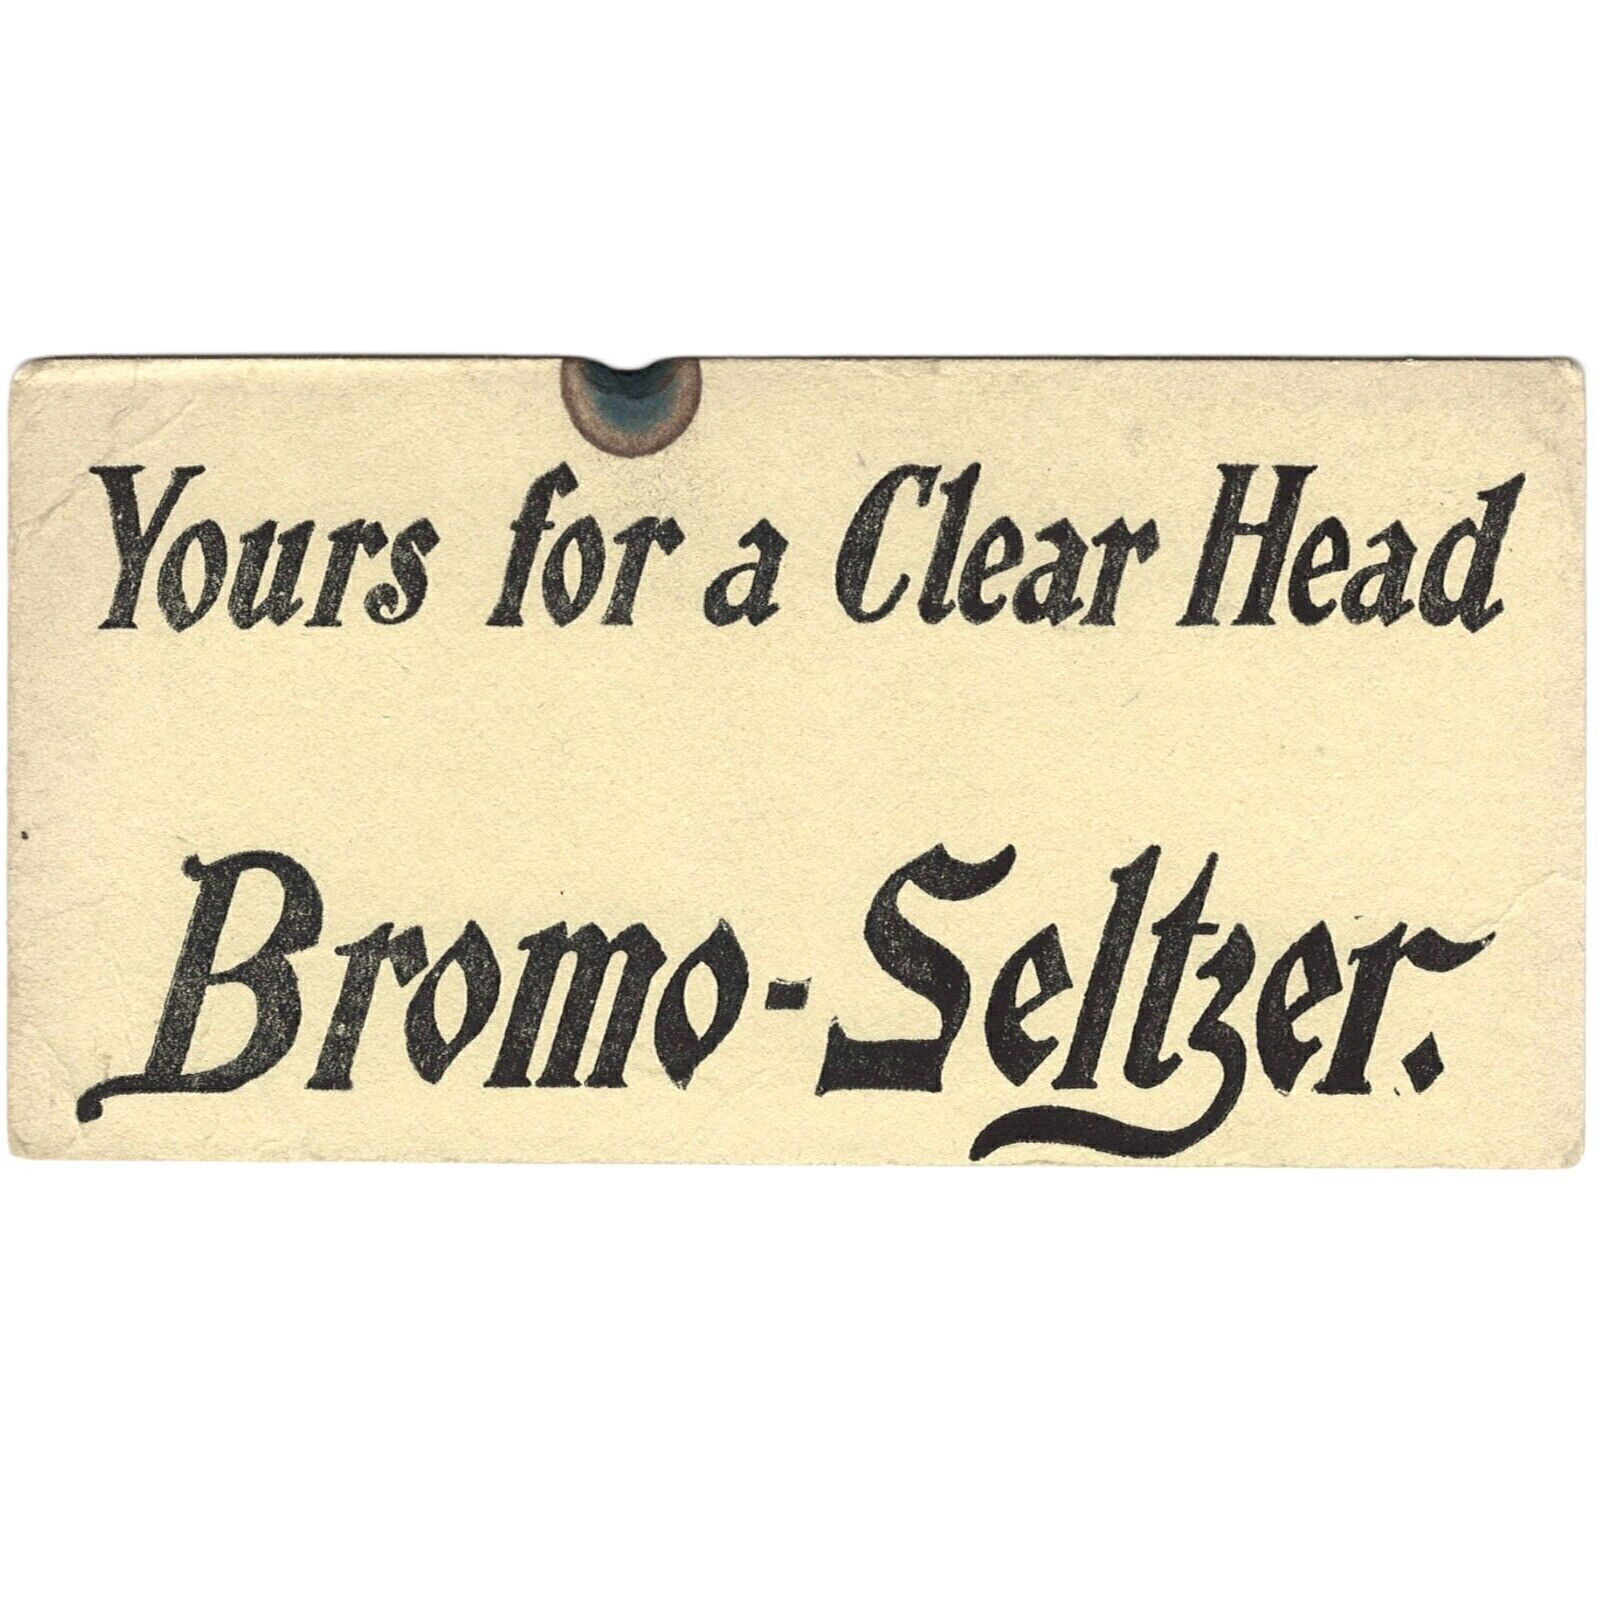 BROMO-SELTZER TRADE CARD EARLY PRINT AD Yours for a Clear Head Victorian Era 